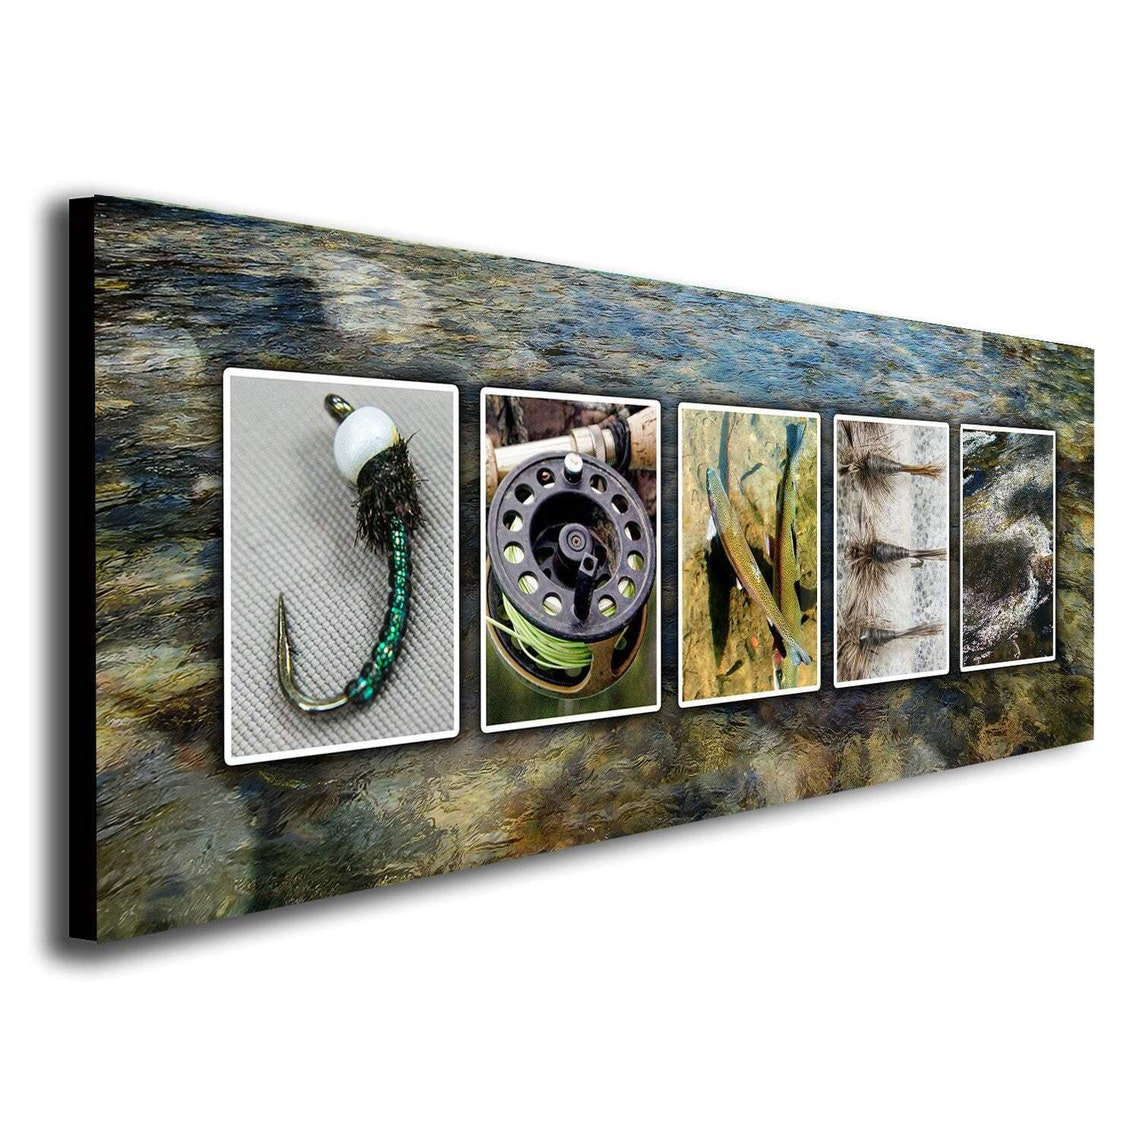 Ebern Designs Personalized Fly Fishing Name Art Gift & Reviews